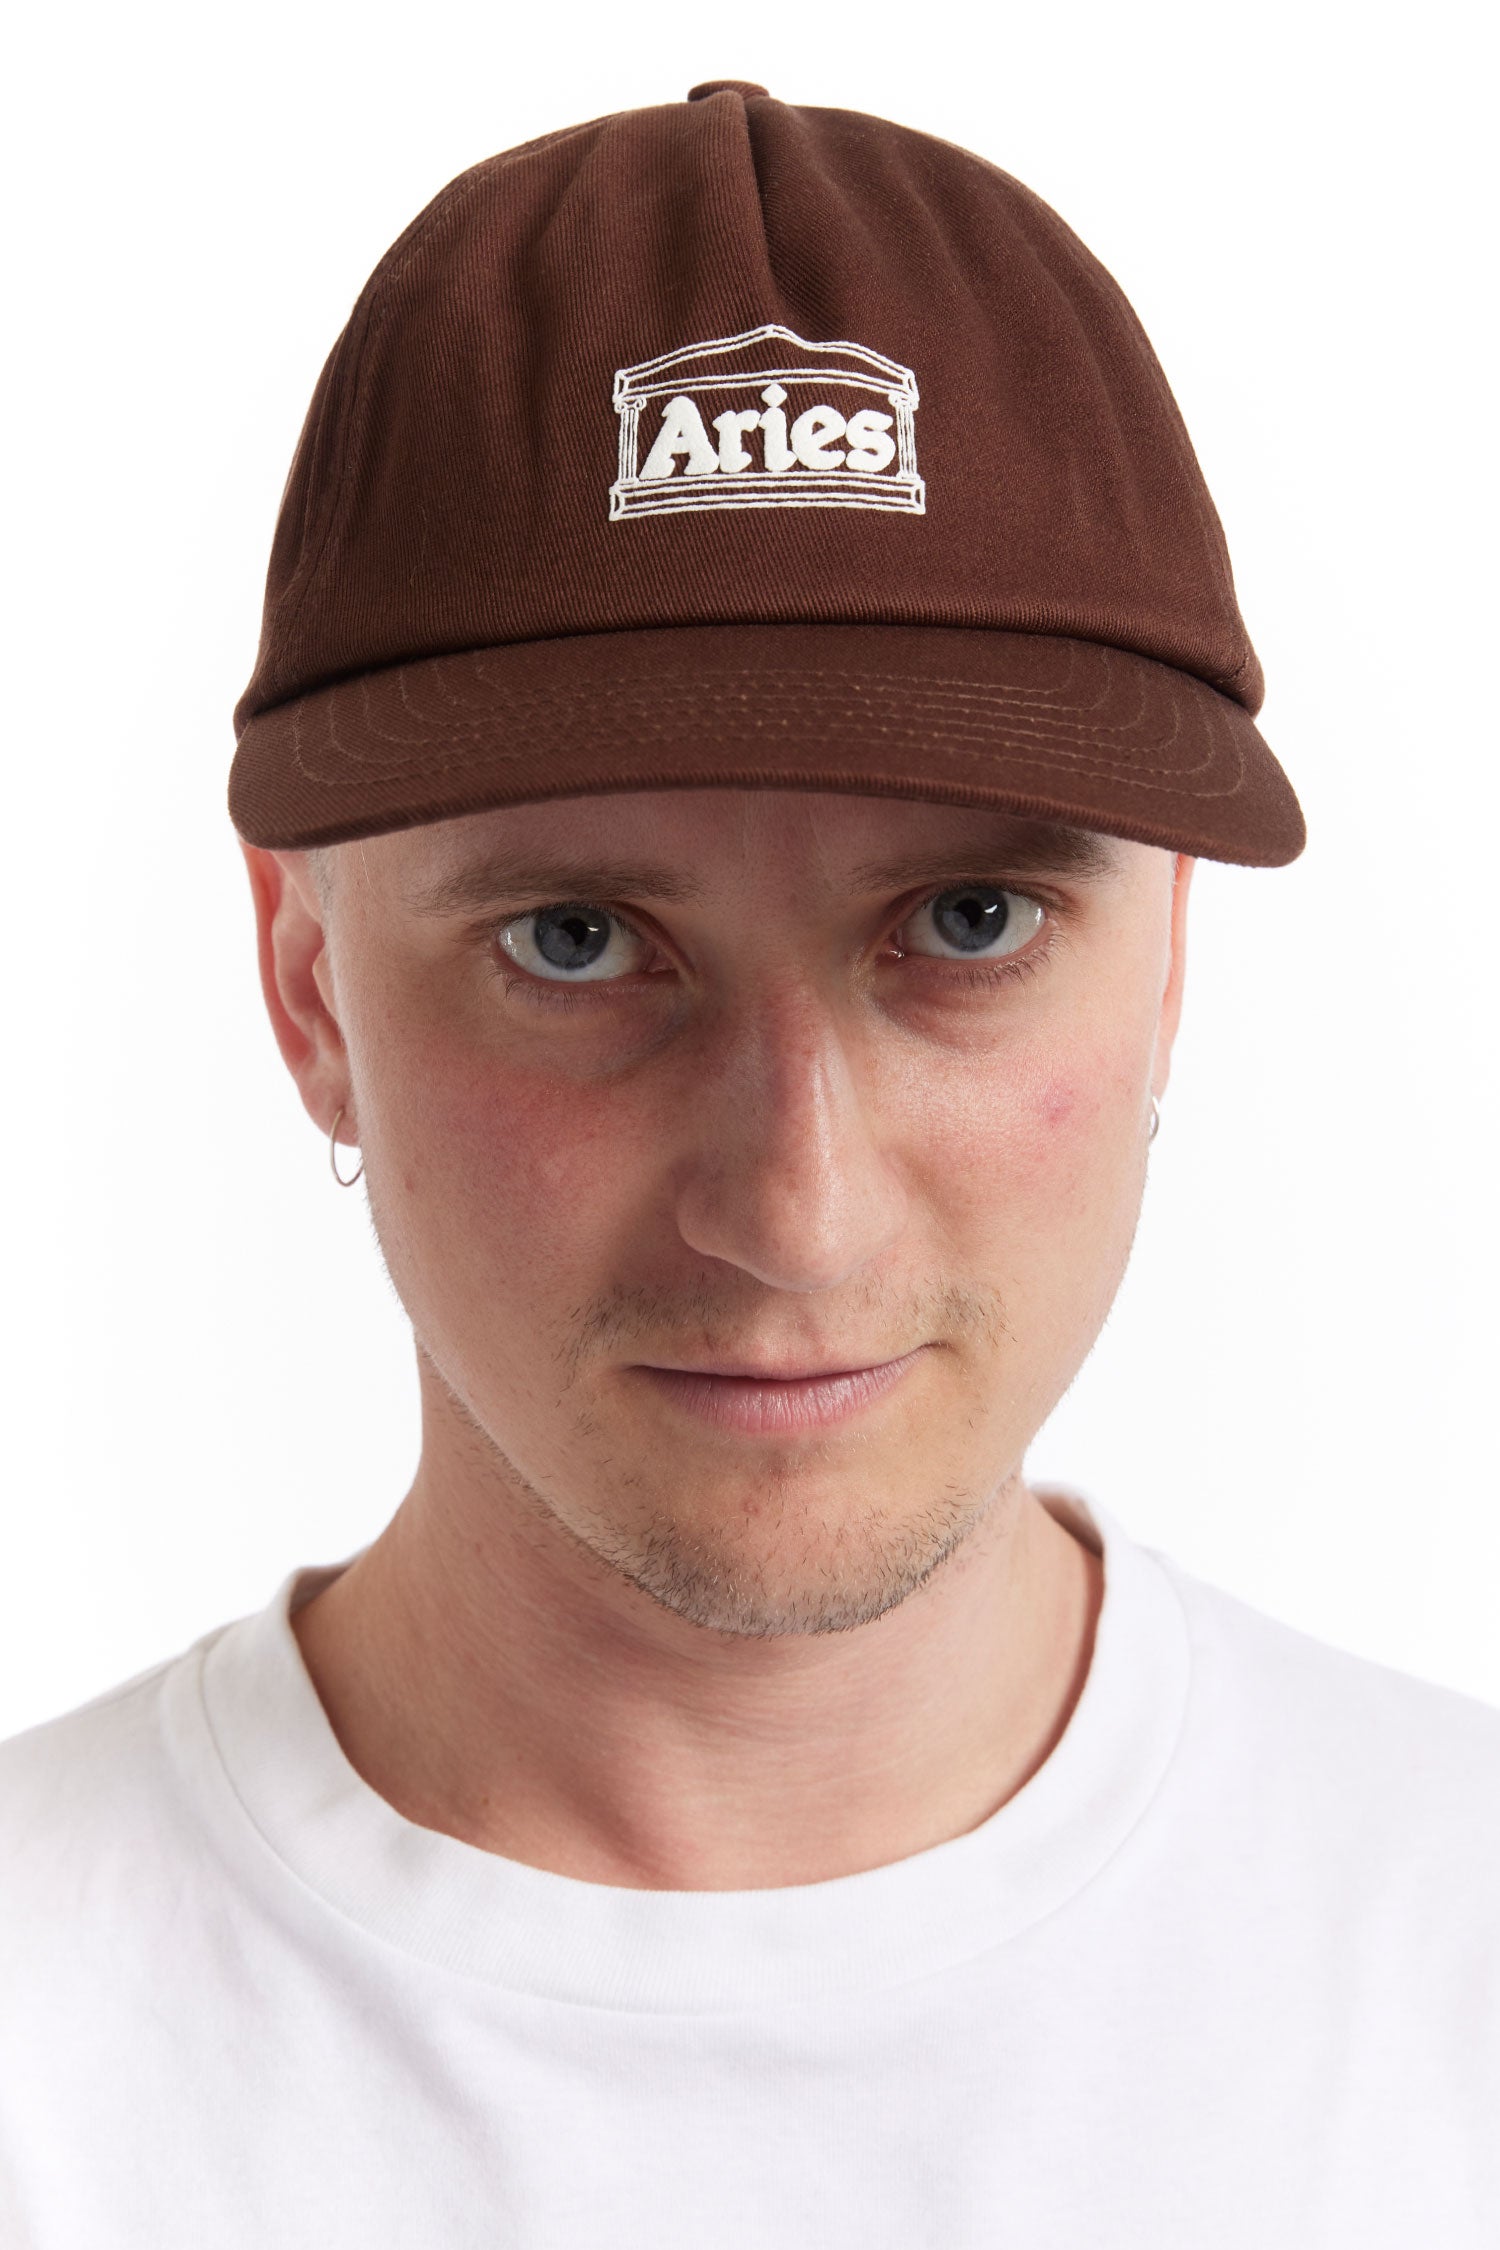 The ARIES - TEMPLE CAP BROWN available online with global shipping, and in PAM Stores Melbourne and Sydney.